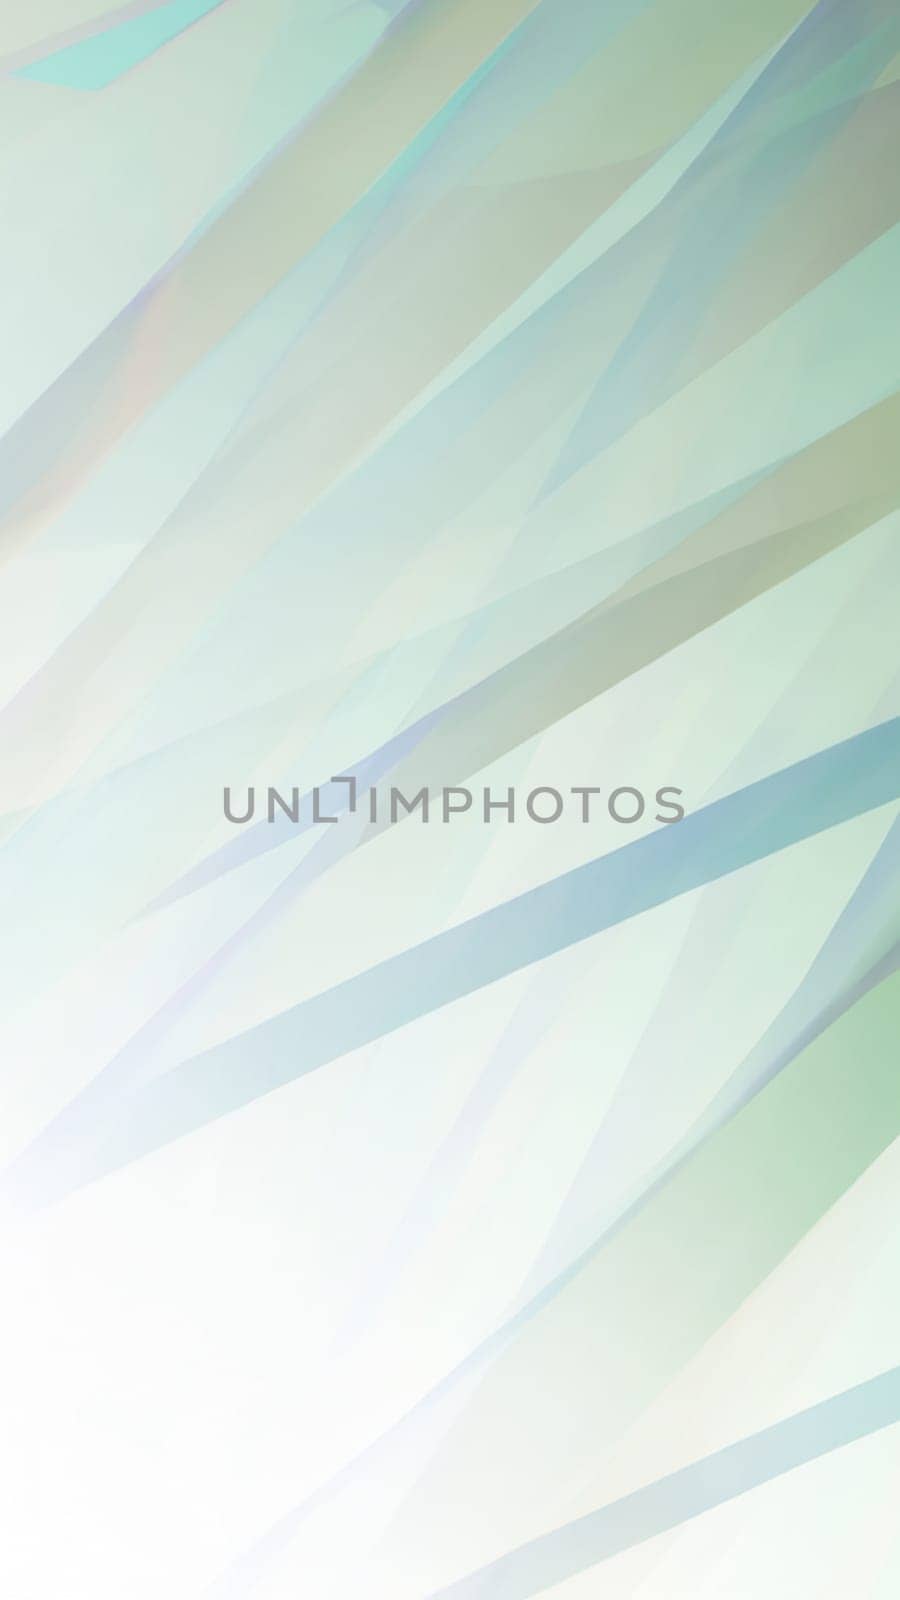 Abstract light background with smooth lines in pastel green and soft blue colors portrait format by DesignMarjolein